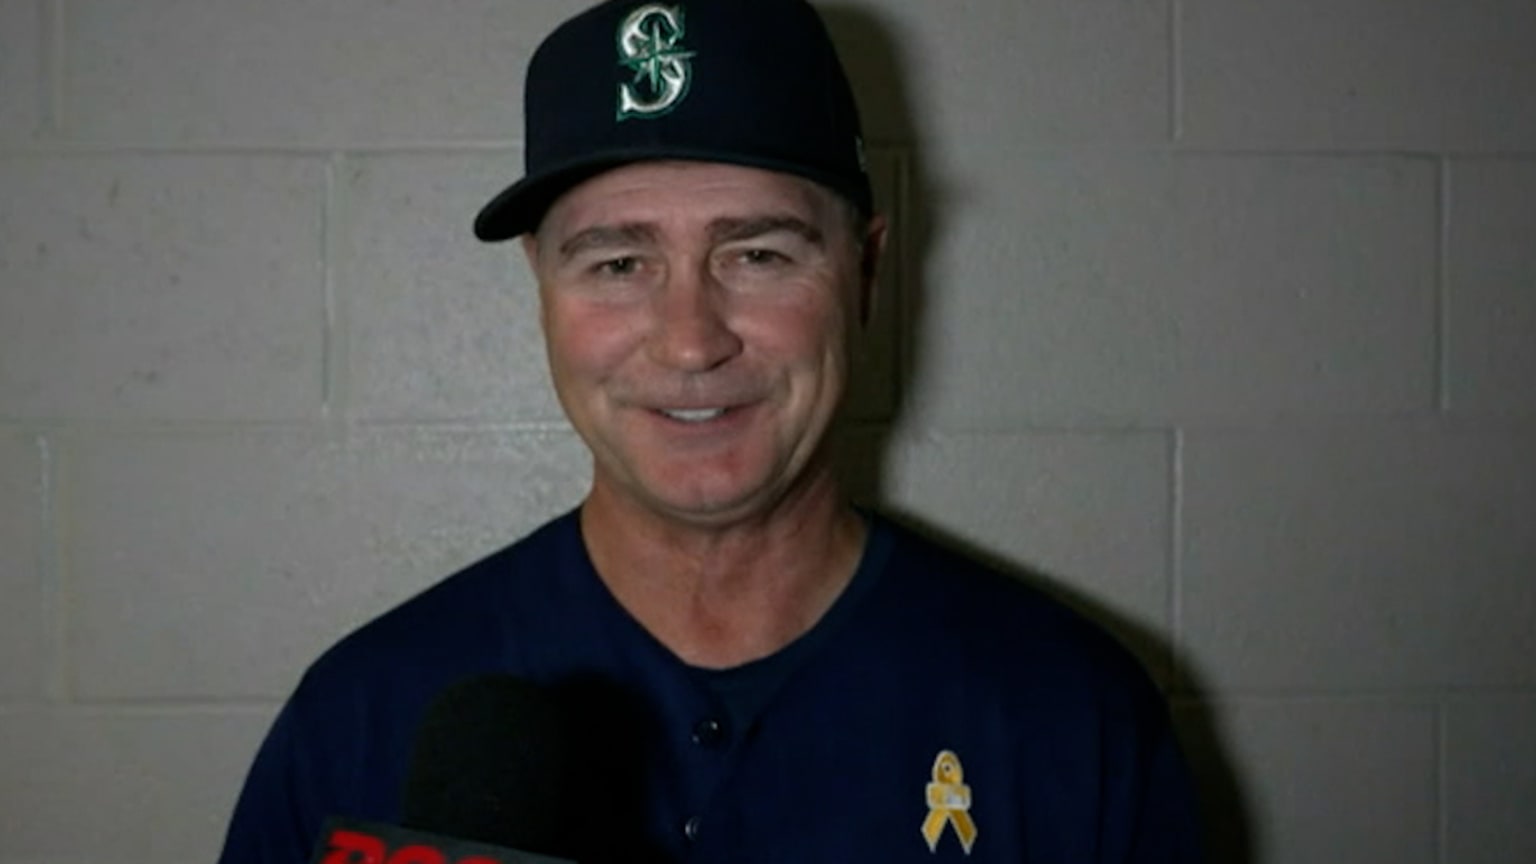 Mariners manager Scott Servais speaks after Game 2 loss to Astros